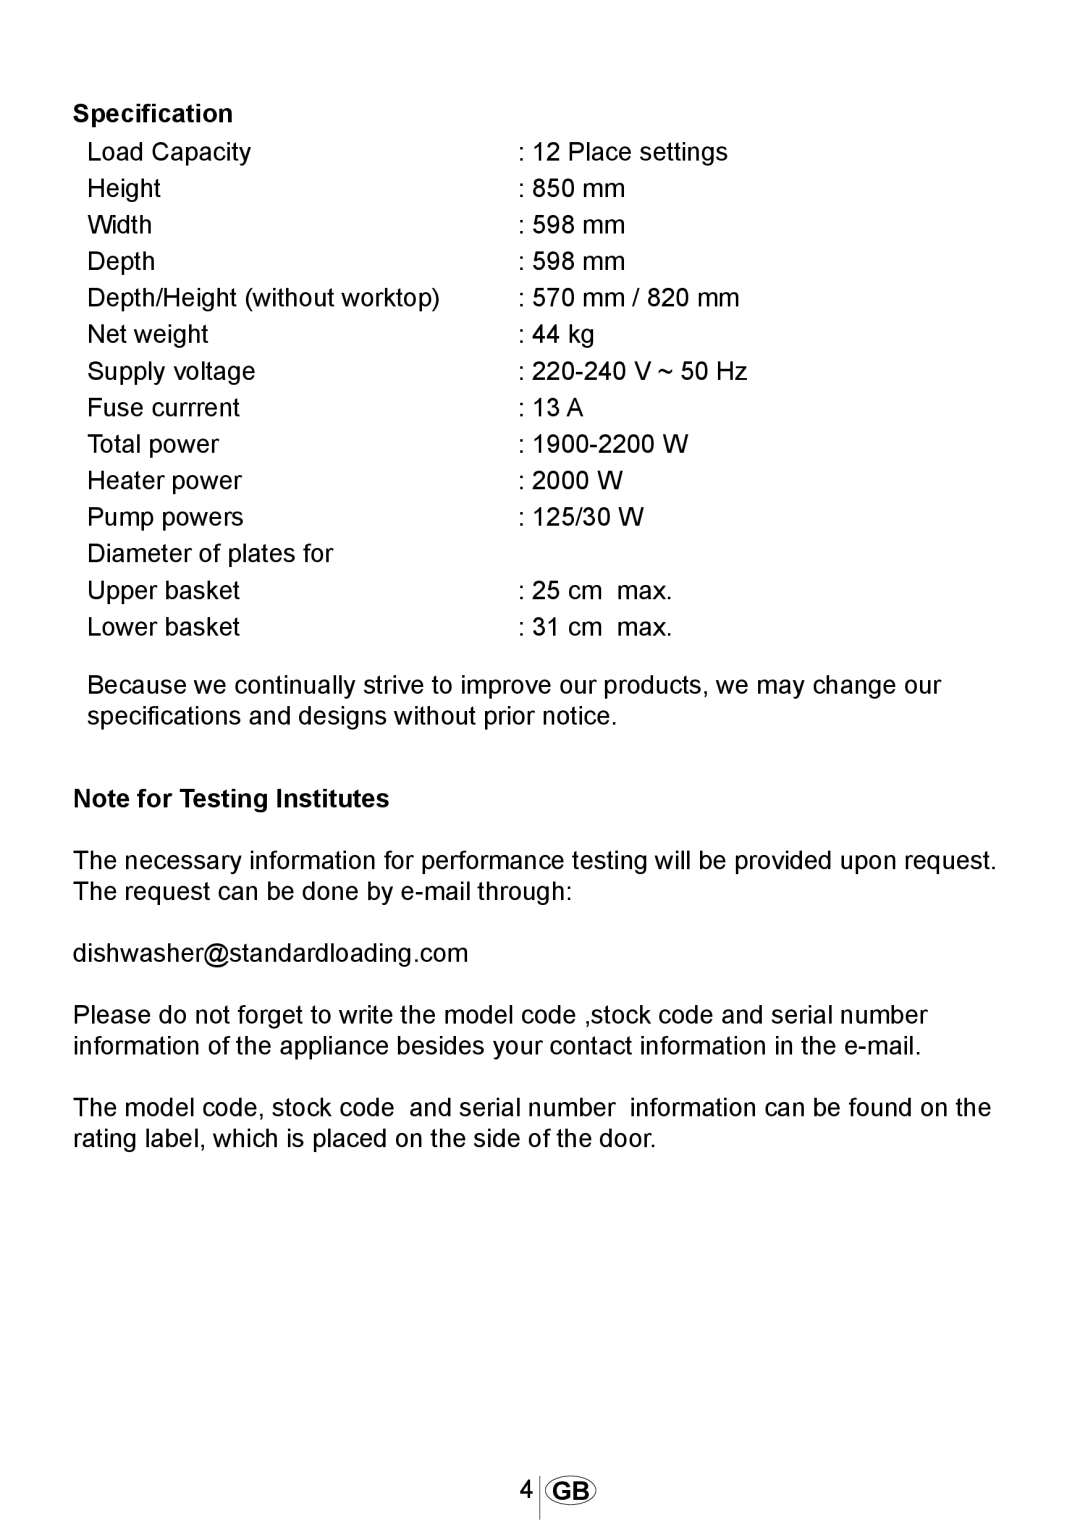 Beko DSFN 1532 manual Specification, Note for Testing Institutes 